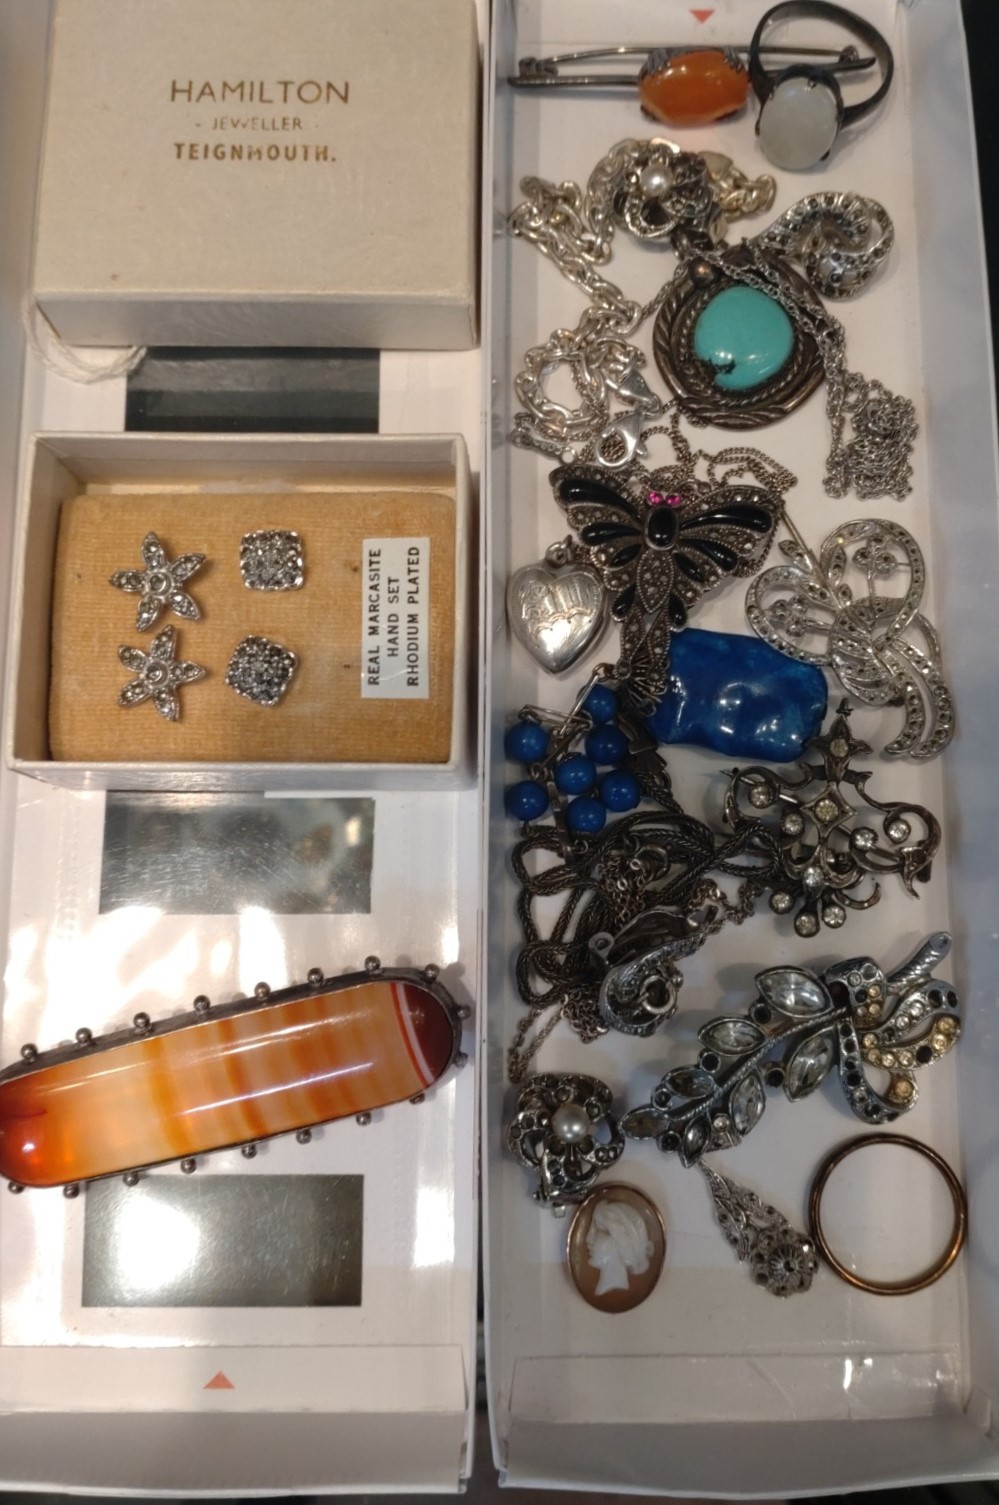 Vintage jewellery including Marcasite brooches and earrings, and silver items.